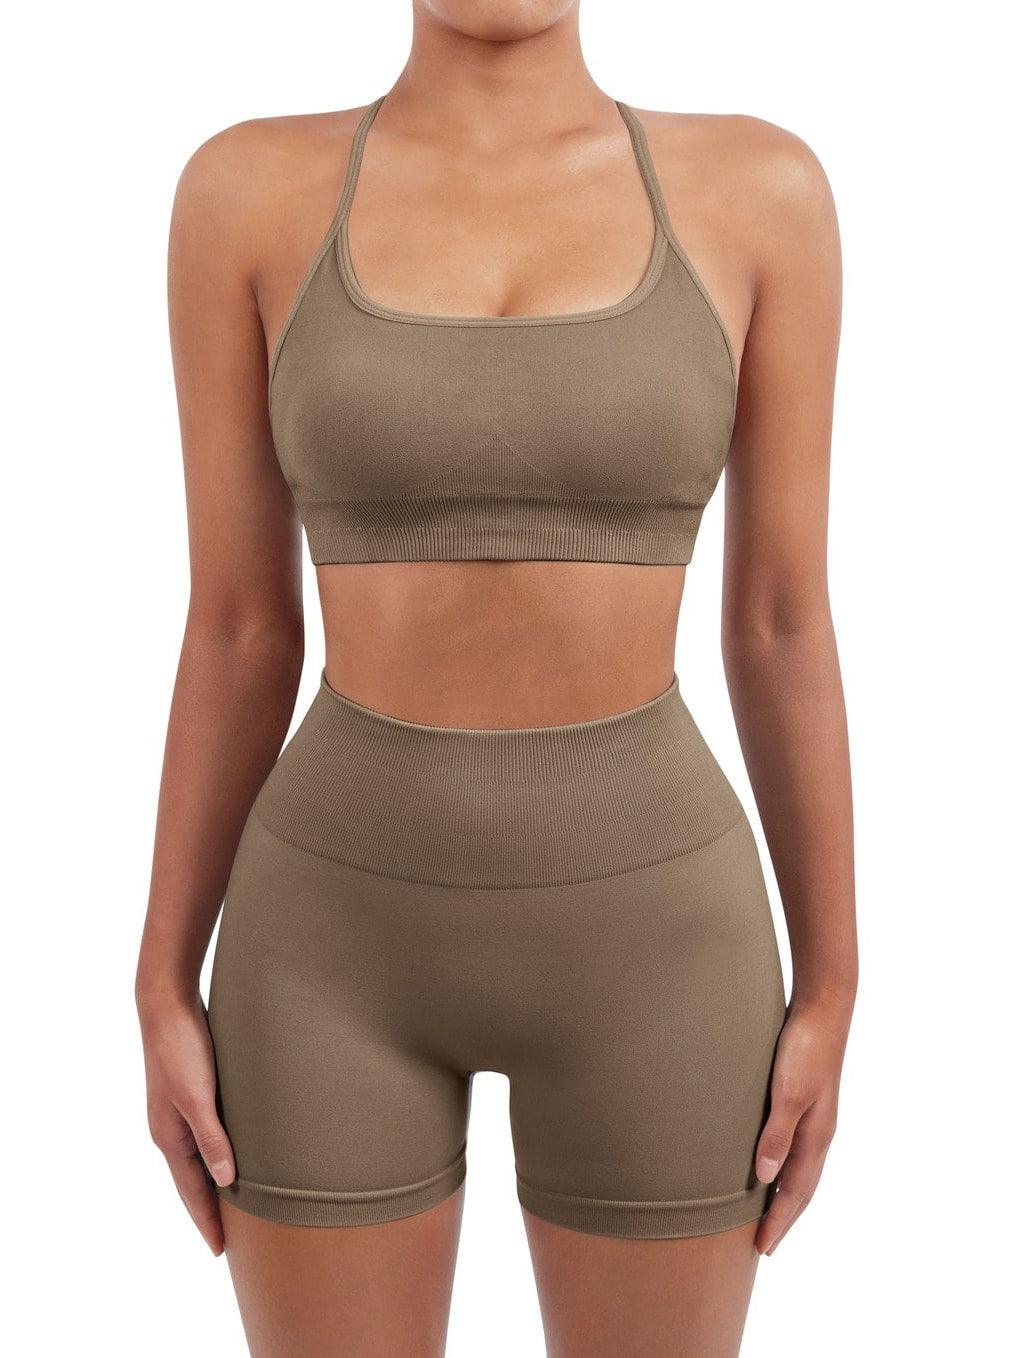 Happy Friday!! 💪Show off your curves in our cute workout set - designed  for comfort and confidence.🥰 #SUUKSESS #Sportsset #Sports